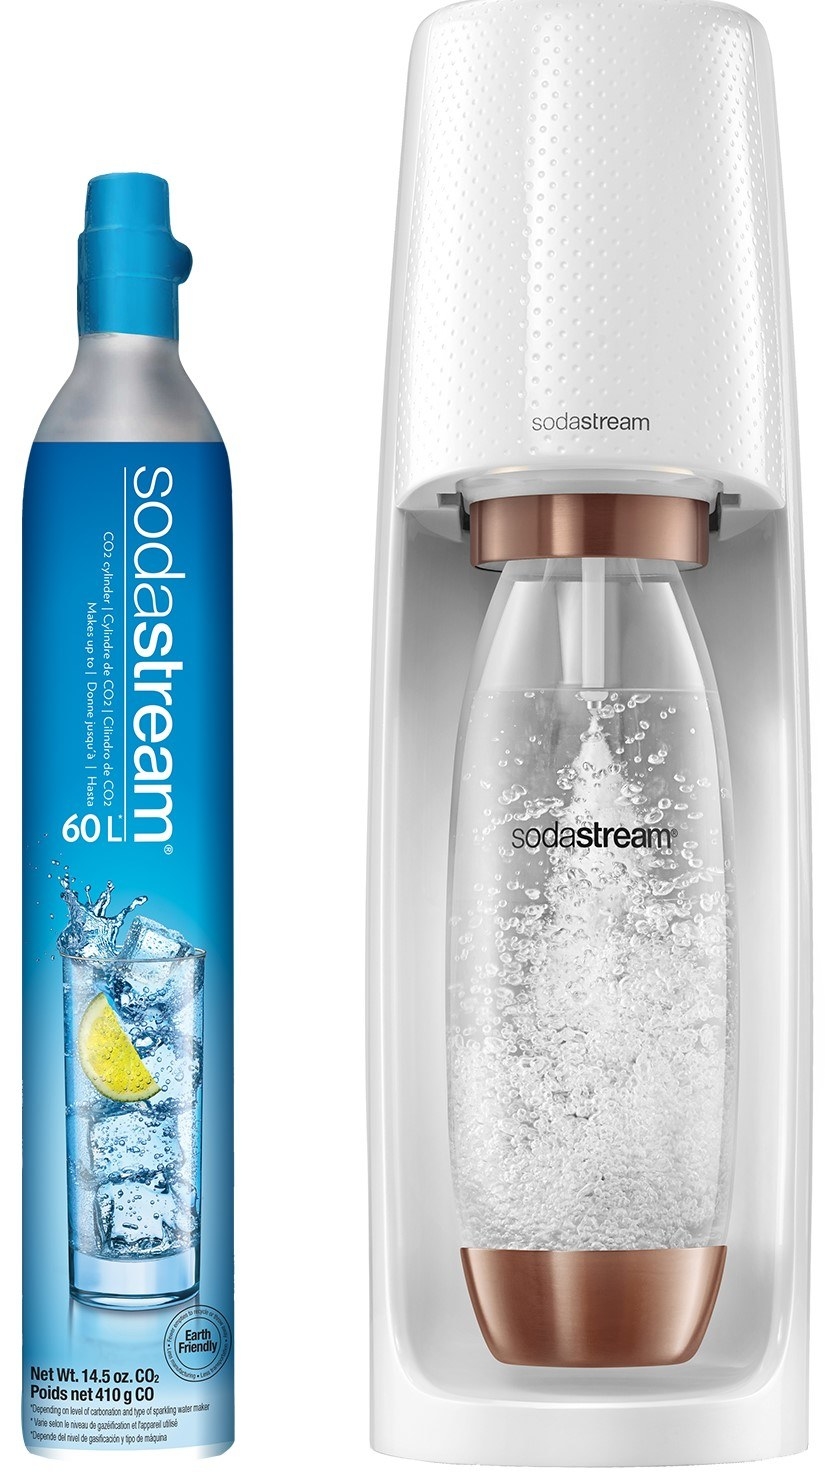 The SodaStream, in white and rose gold